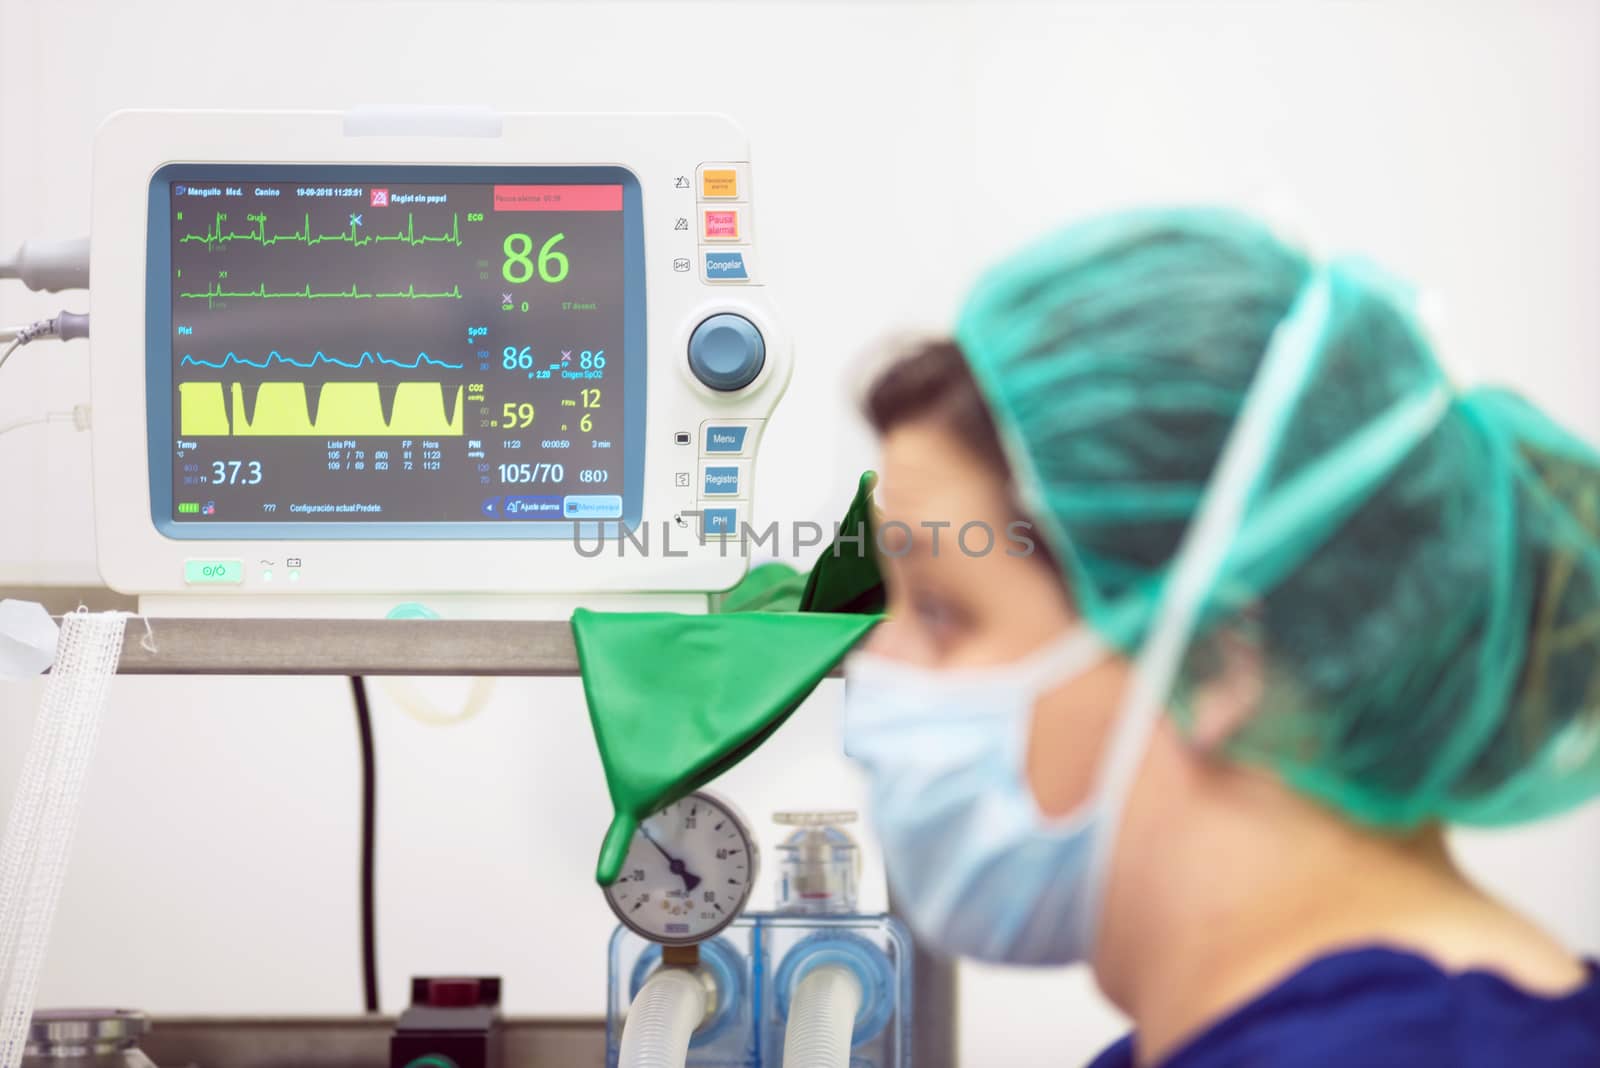 Veterinarian doctor portrait in operating room. Anesthesia monitoring in the background